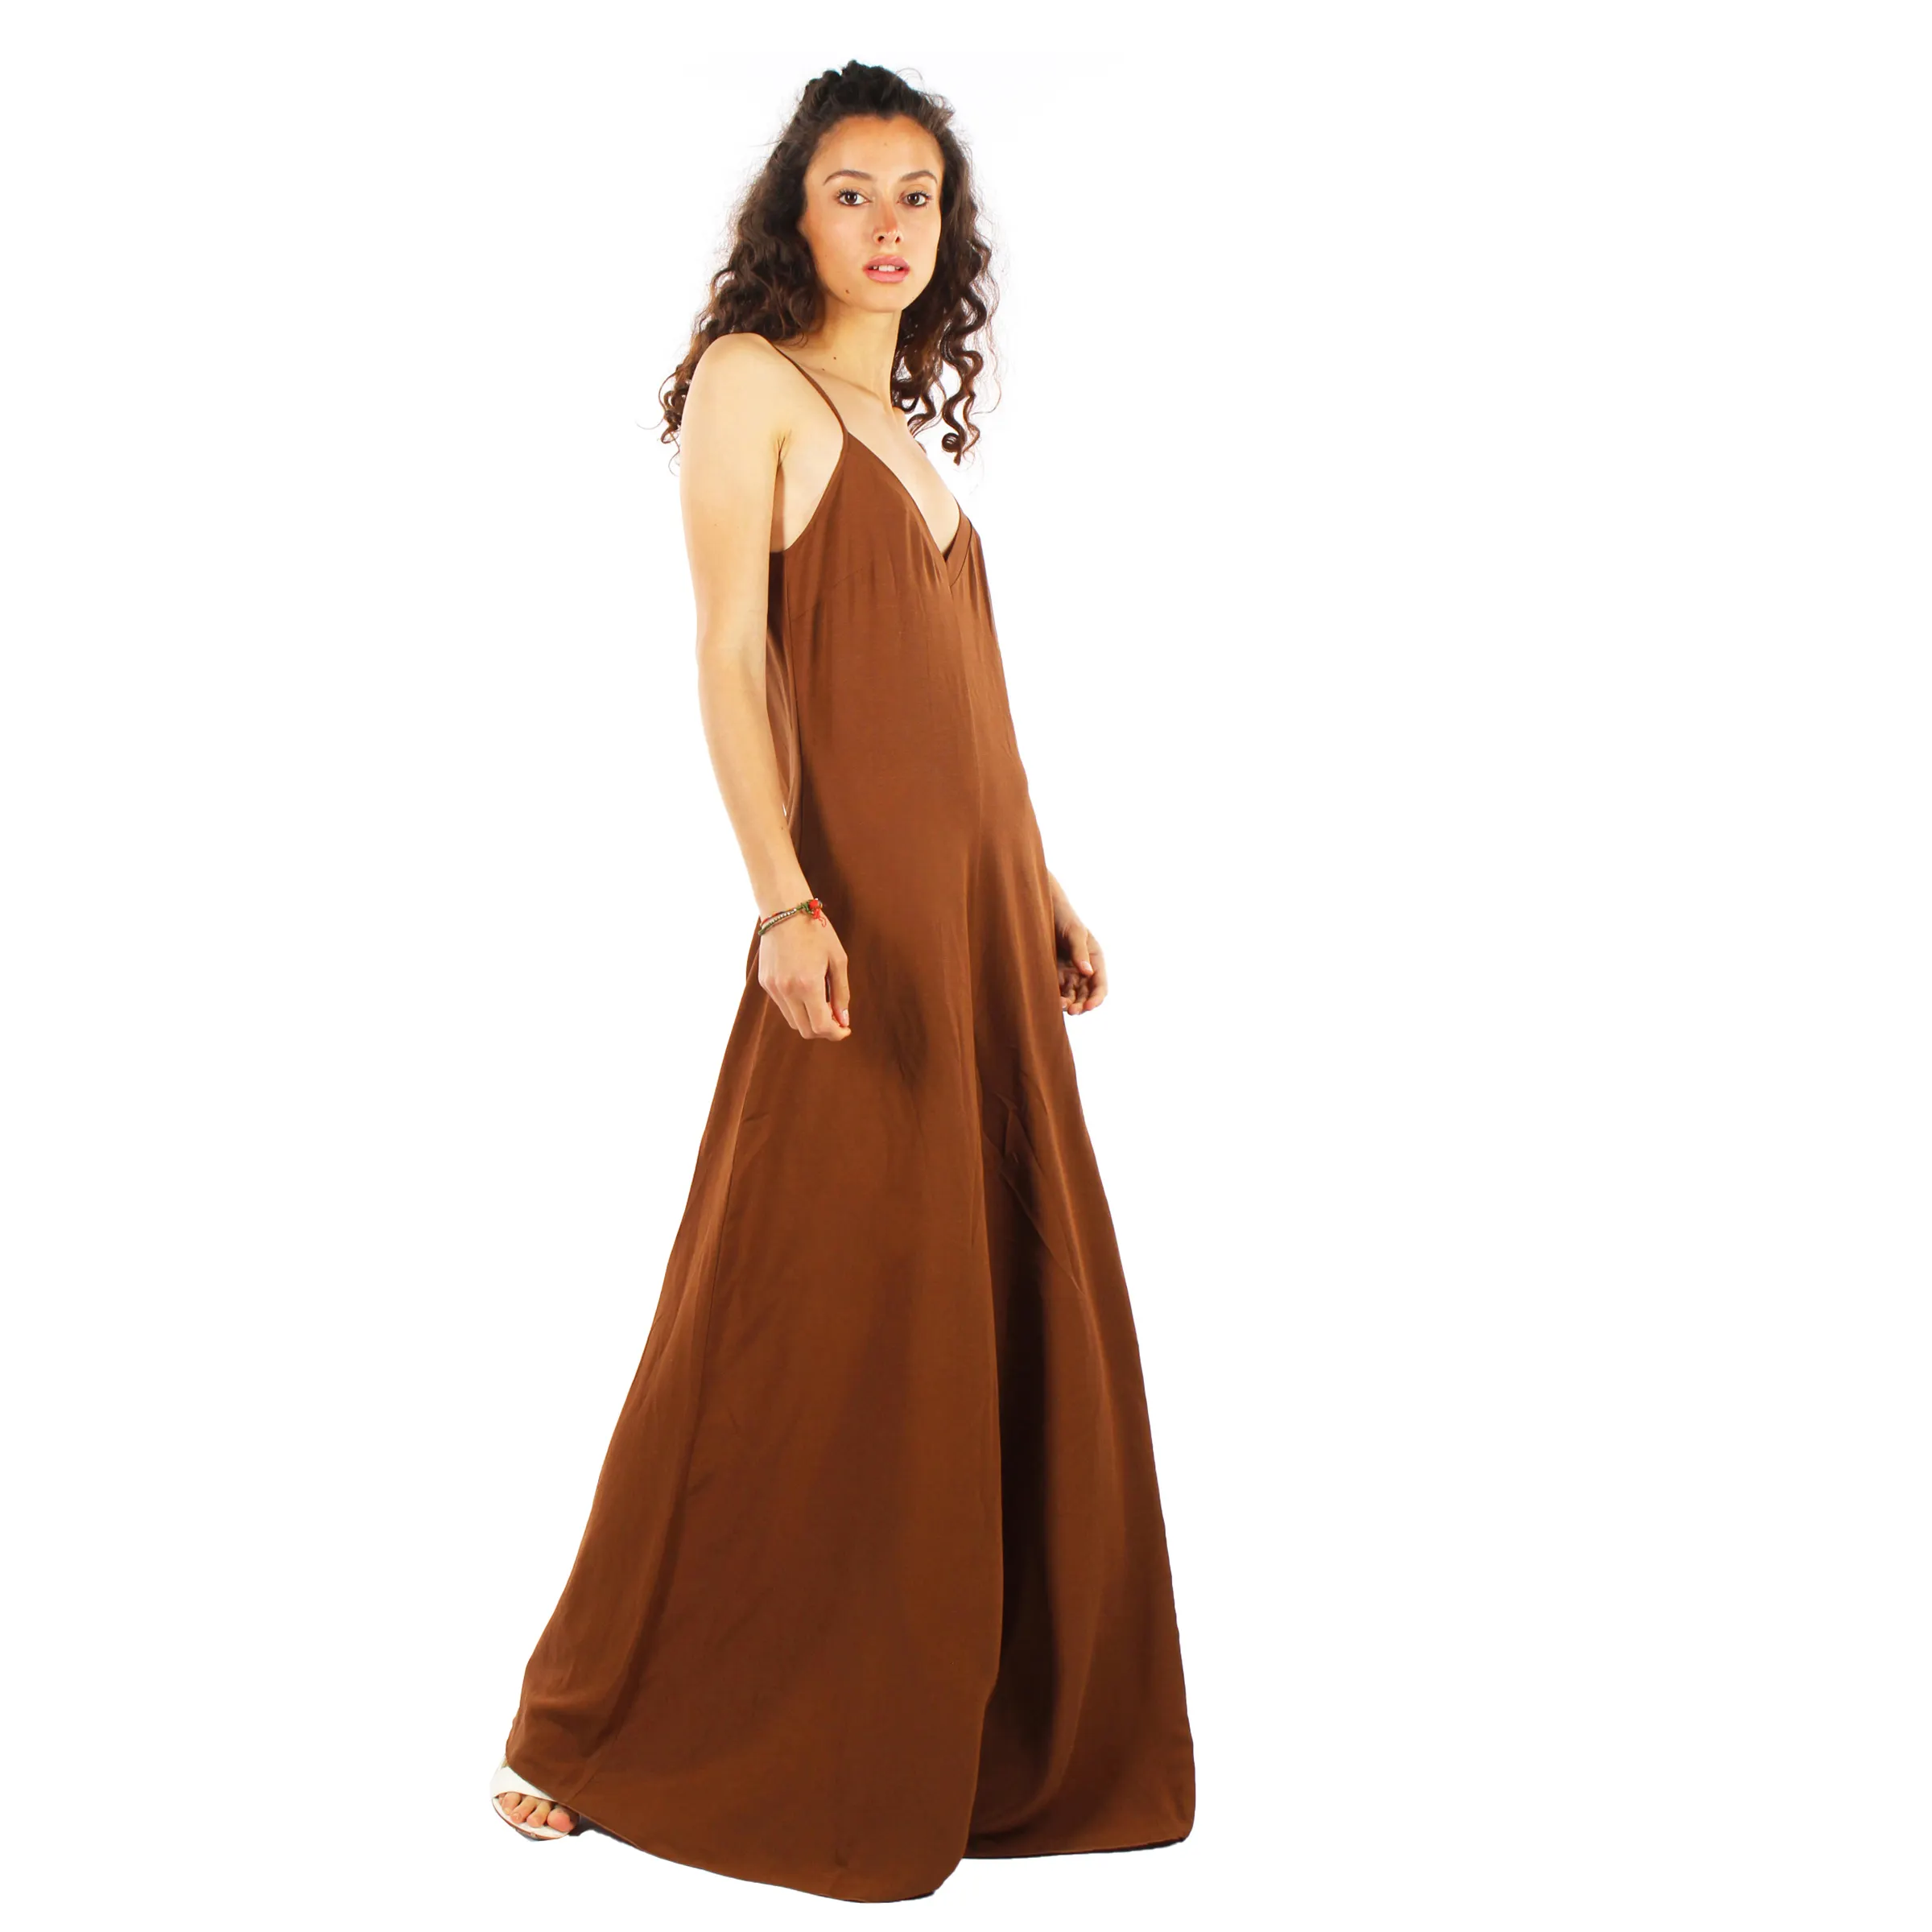 Effortlessly Modern Sleeveless Brown Palazzo Jumpsuit in a Luxurious Viscose-Linen for daytime party size large